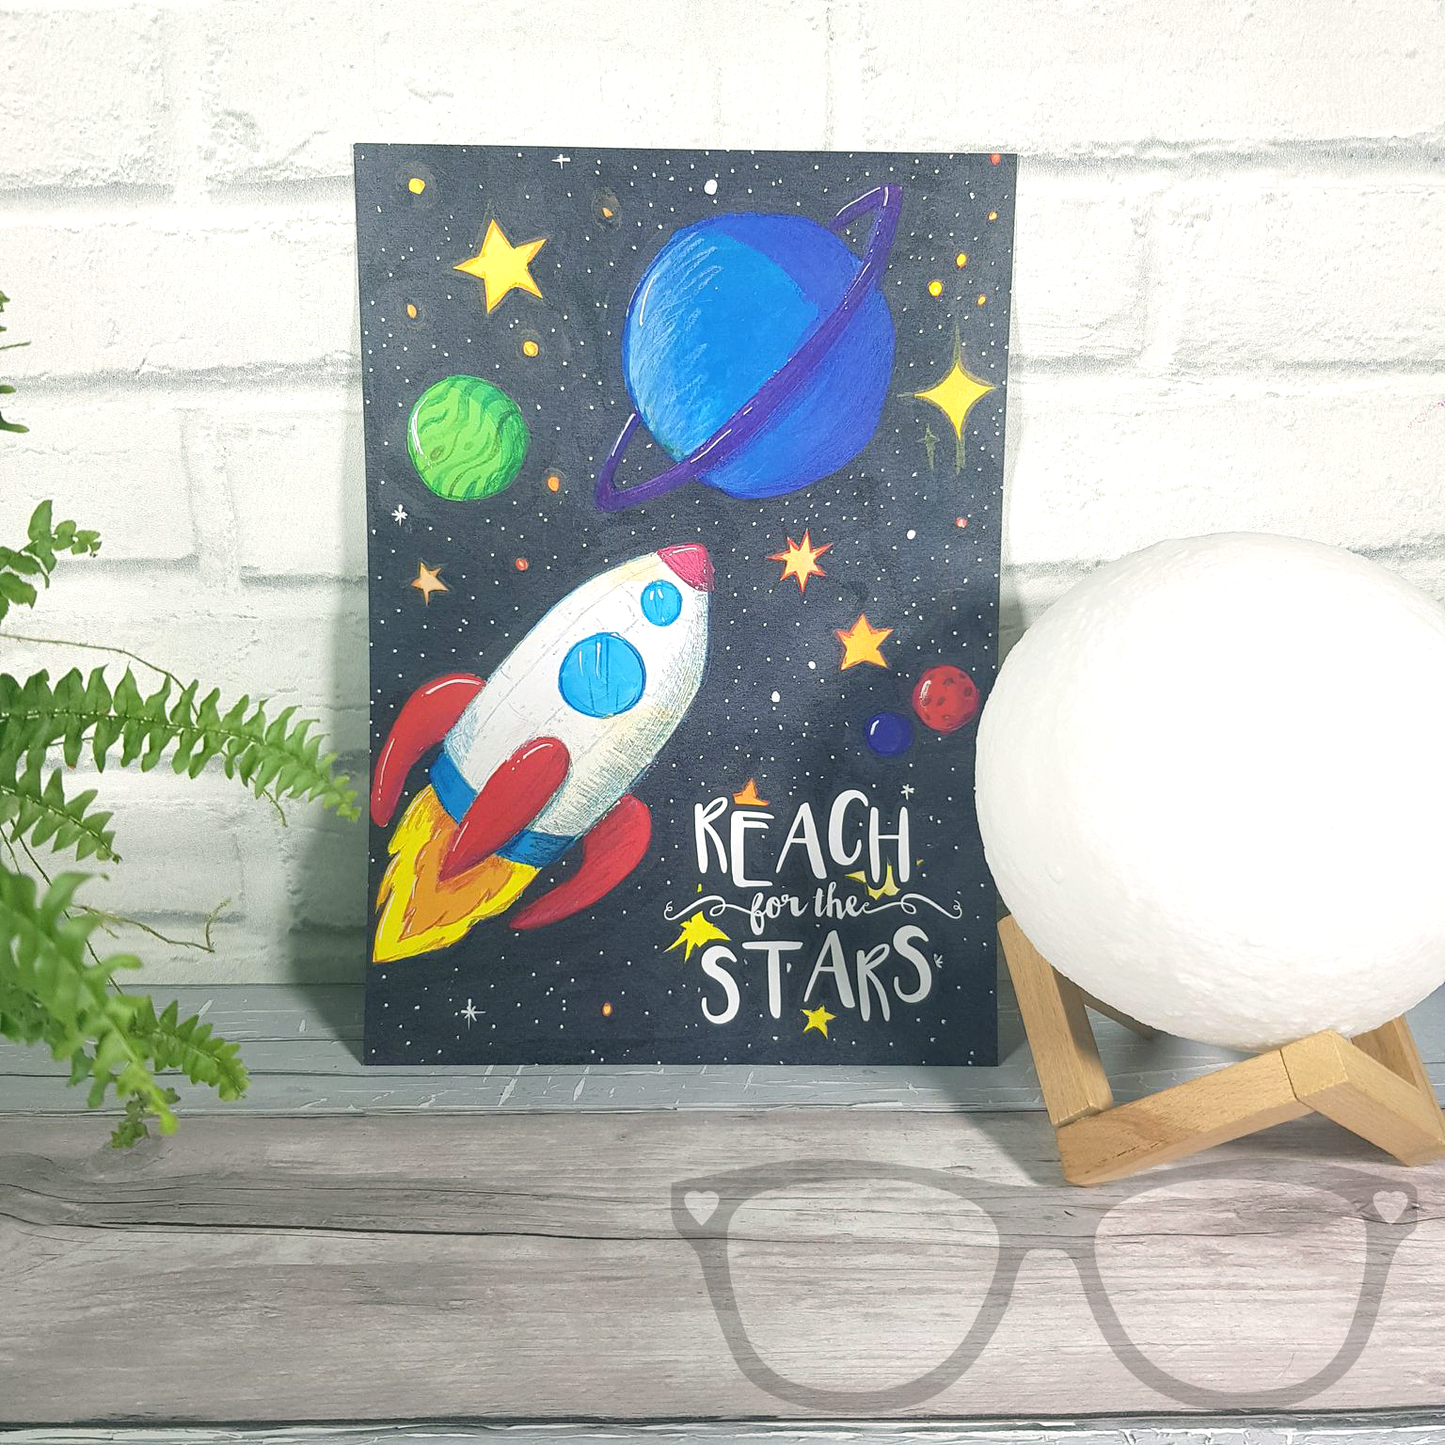 Reach for the stars A4 art print, a digital print of an original illustration showing a white rocket shooting through space with p[lanets and stars. The text reads "Reach for the stars" it is shown without a frame 